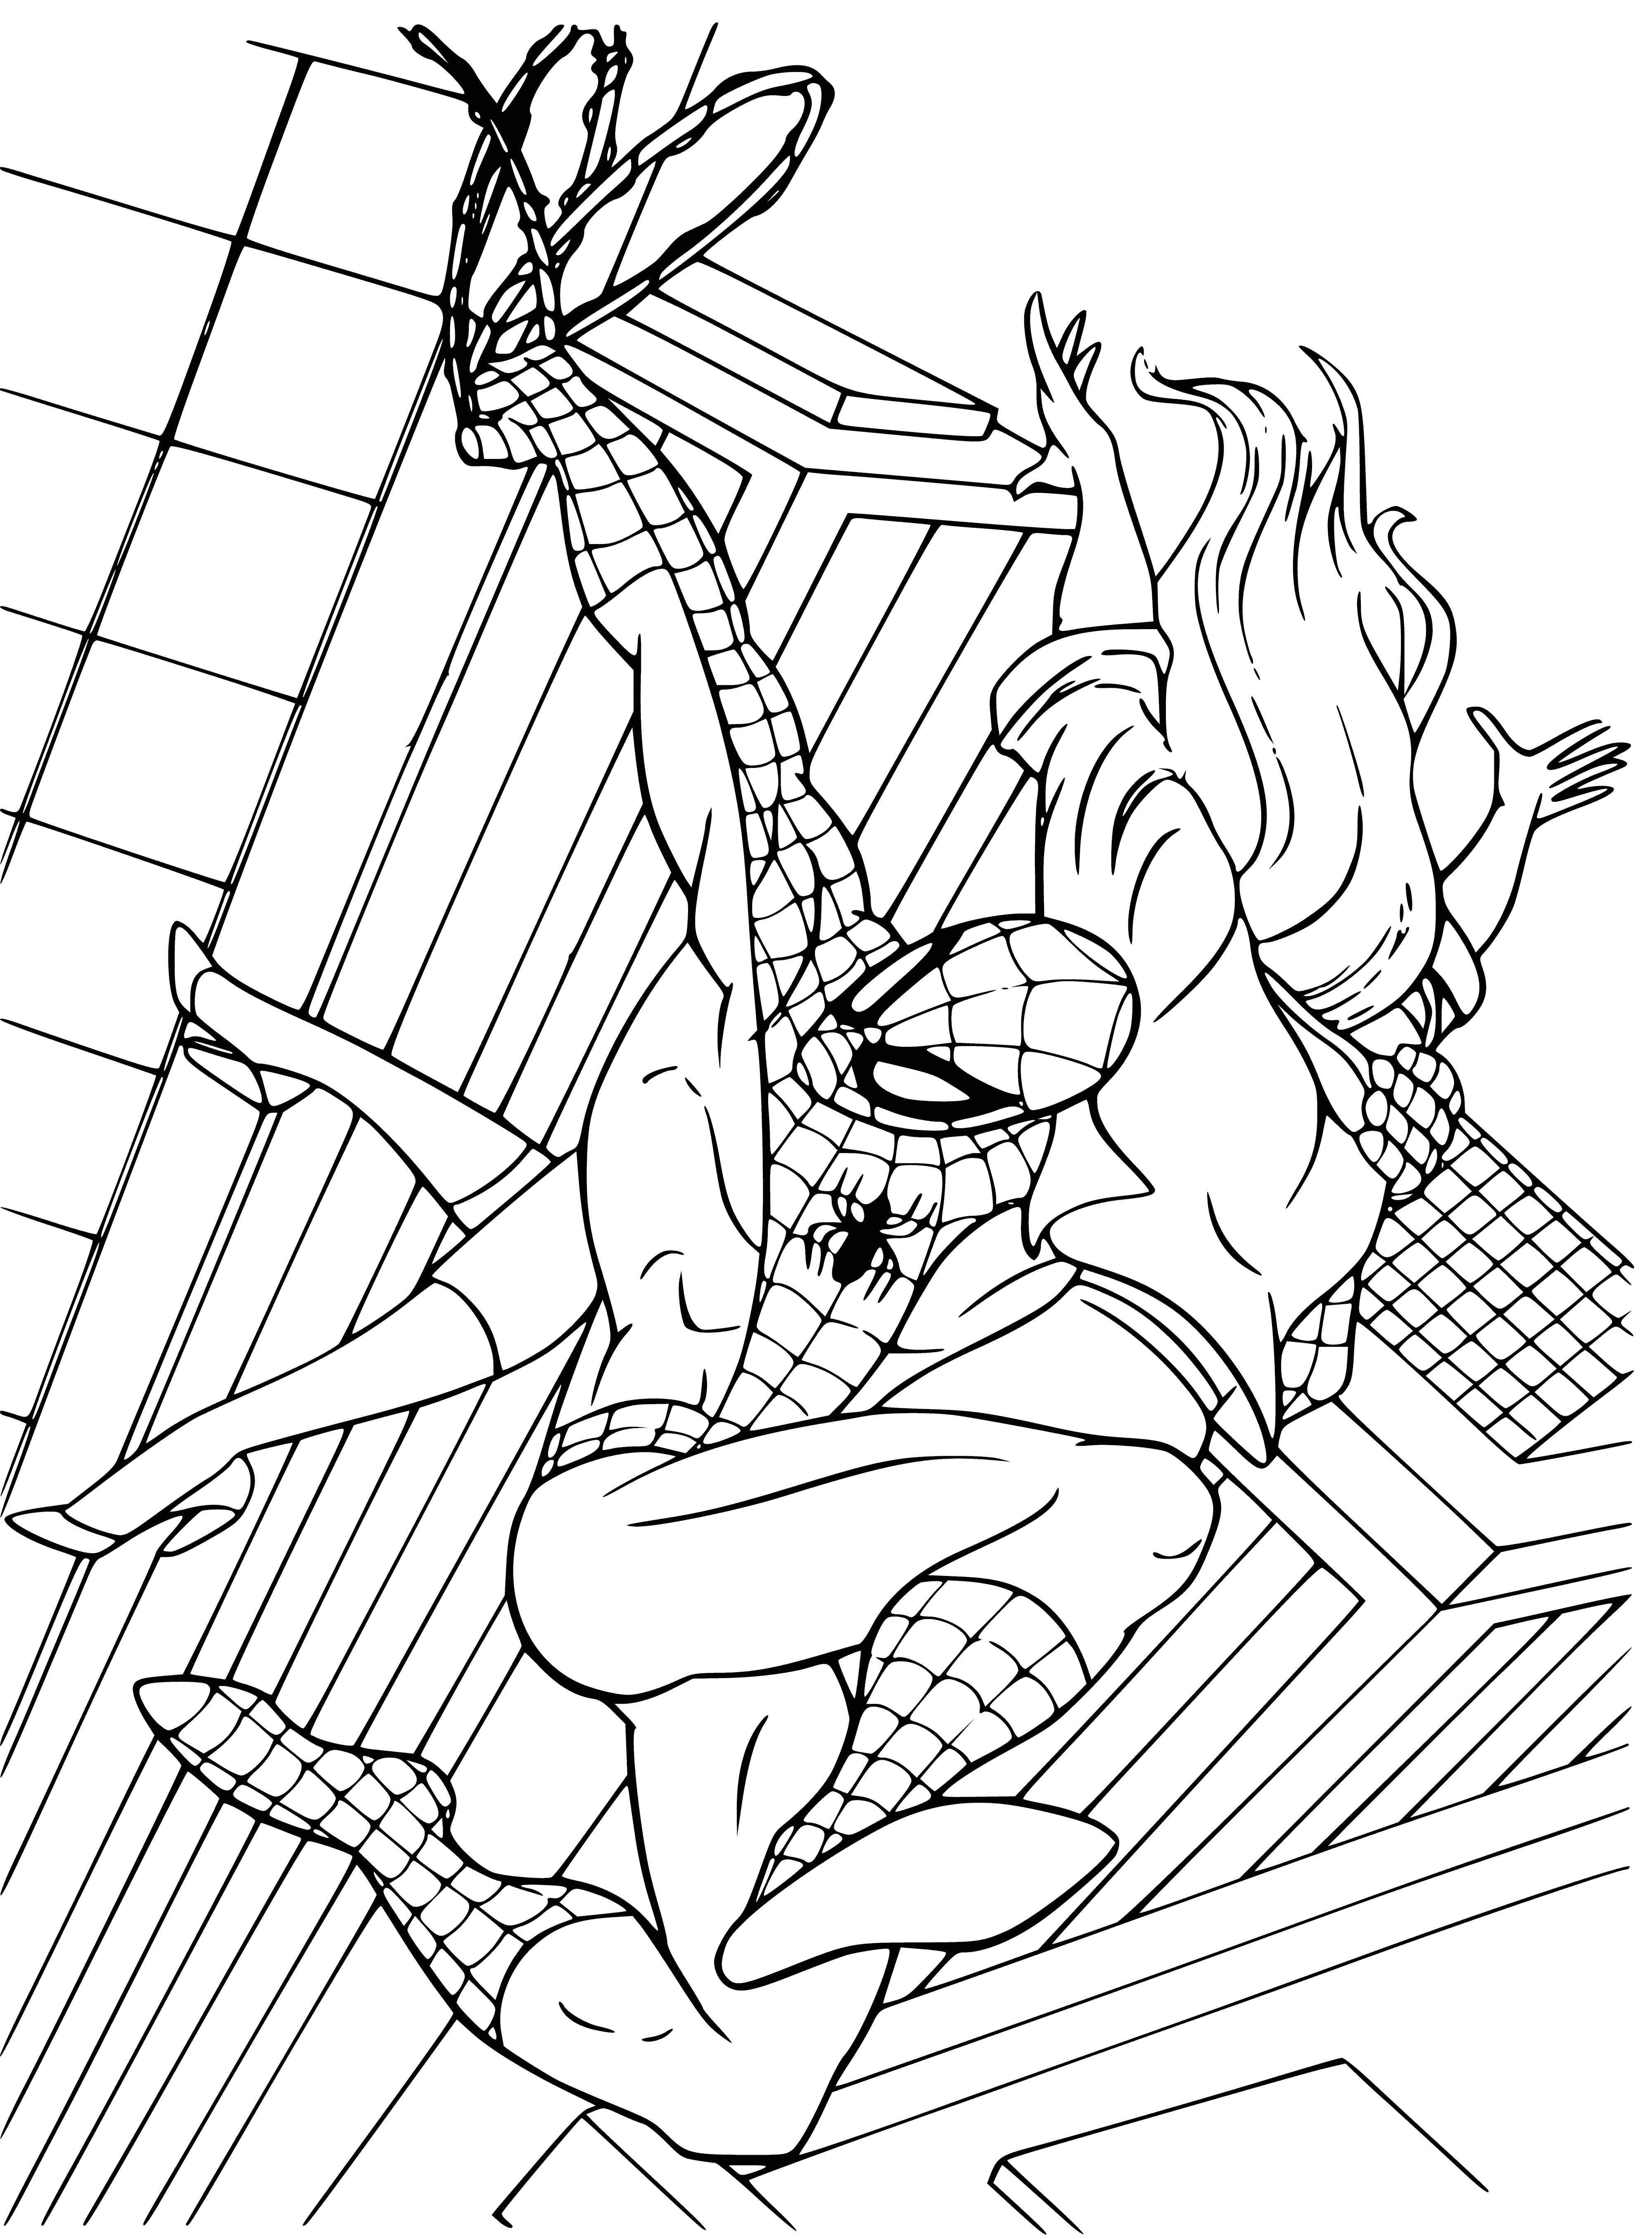 Spiderman rescues a girl coloring page